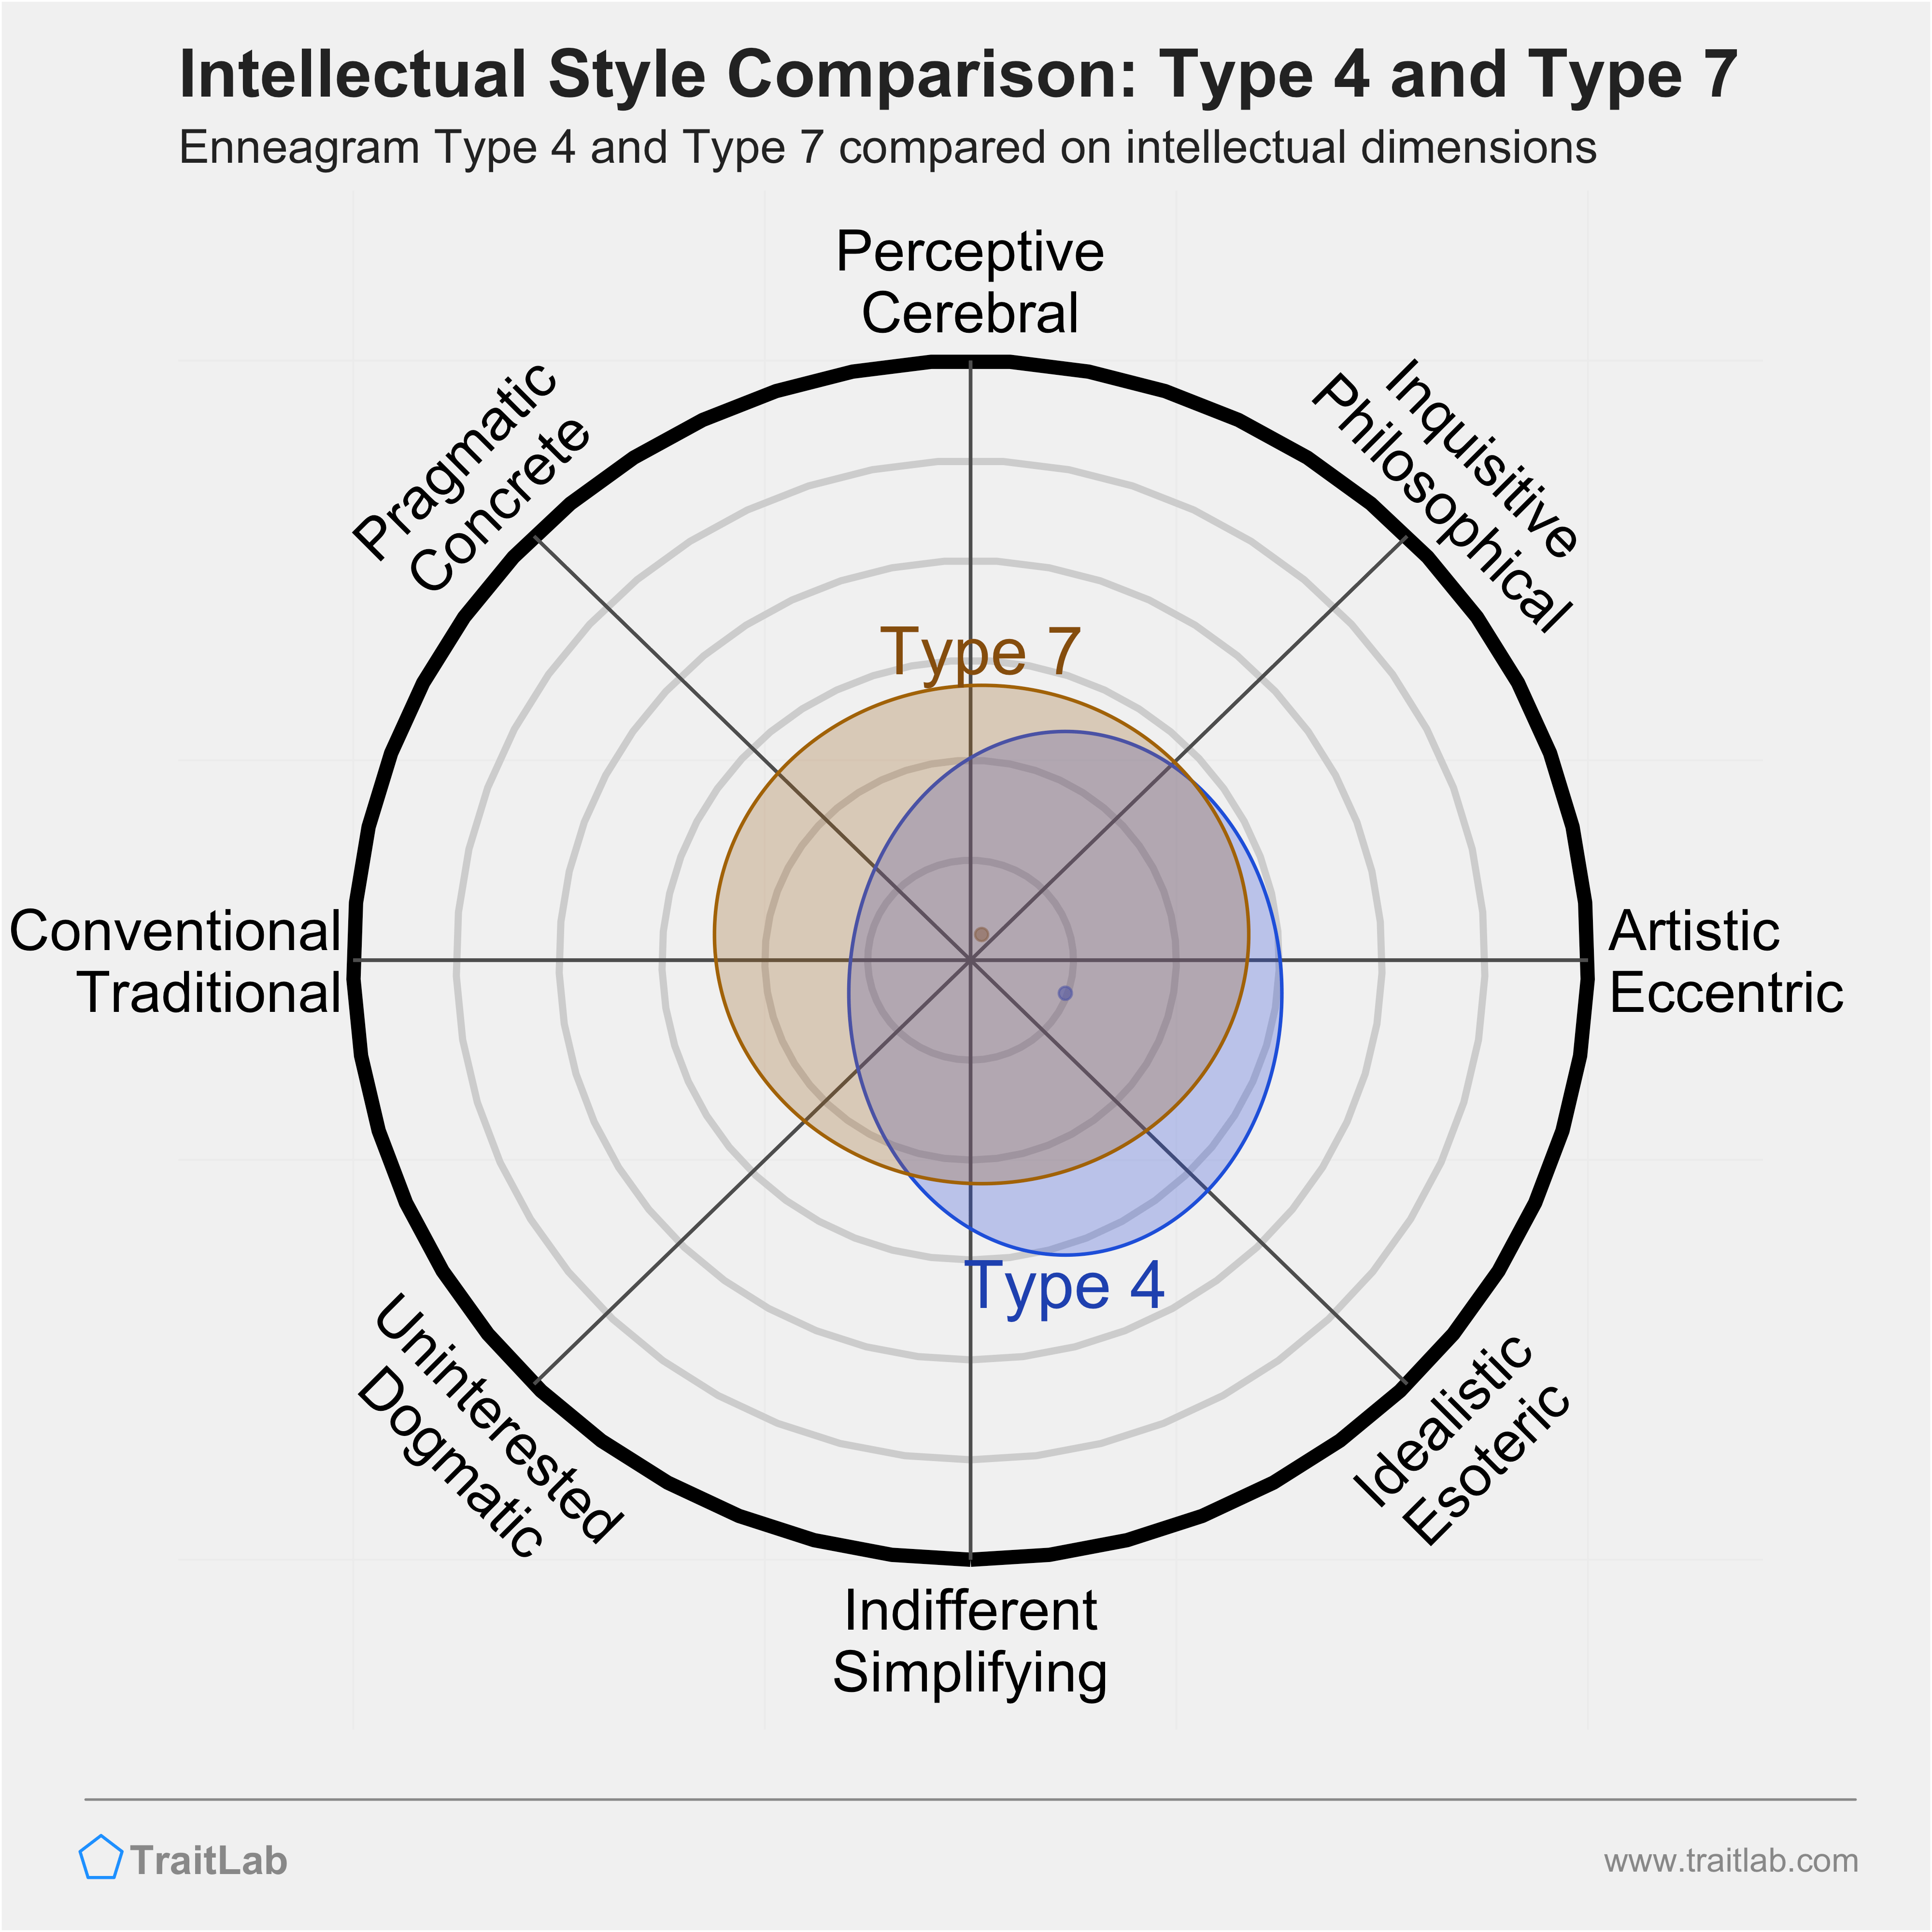 Type 4 and Type 7 comparison across intellectual dimensions